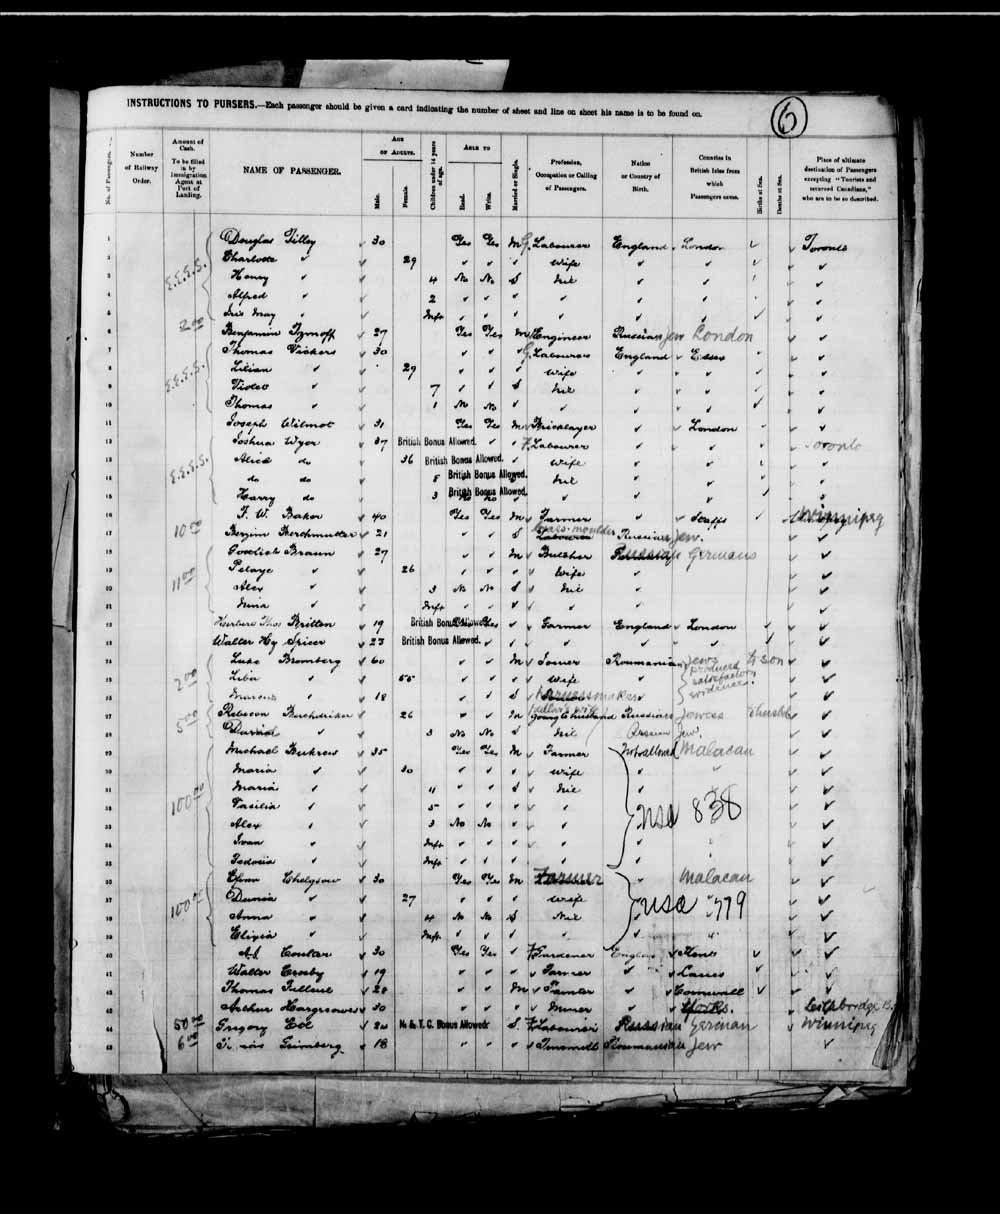 Digitized page of Passenger Lists for Image No.: e003658076